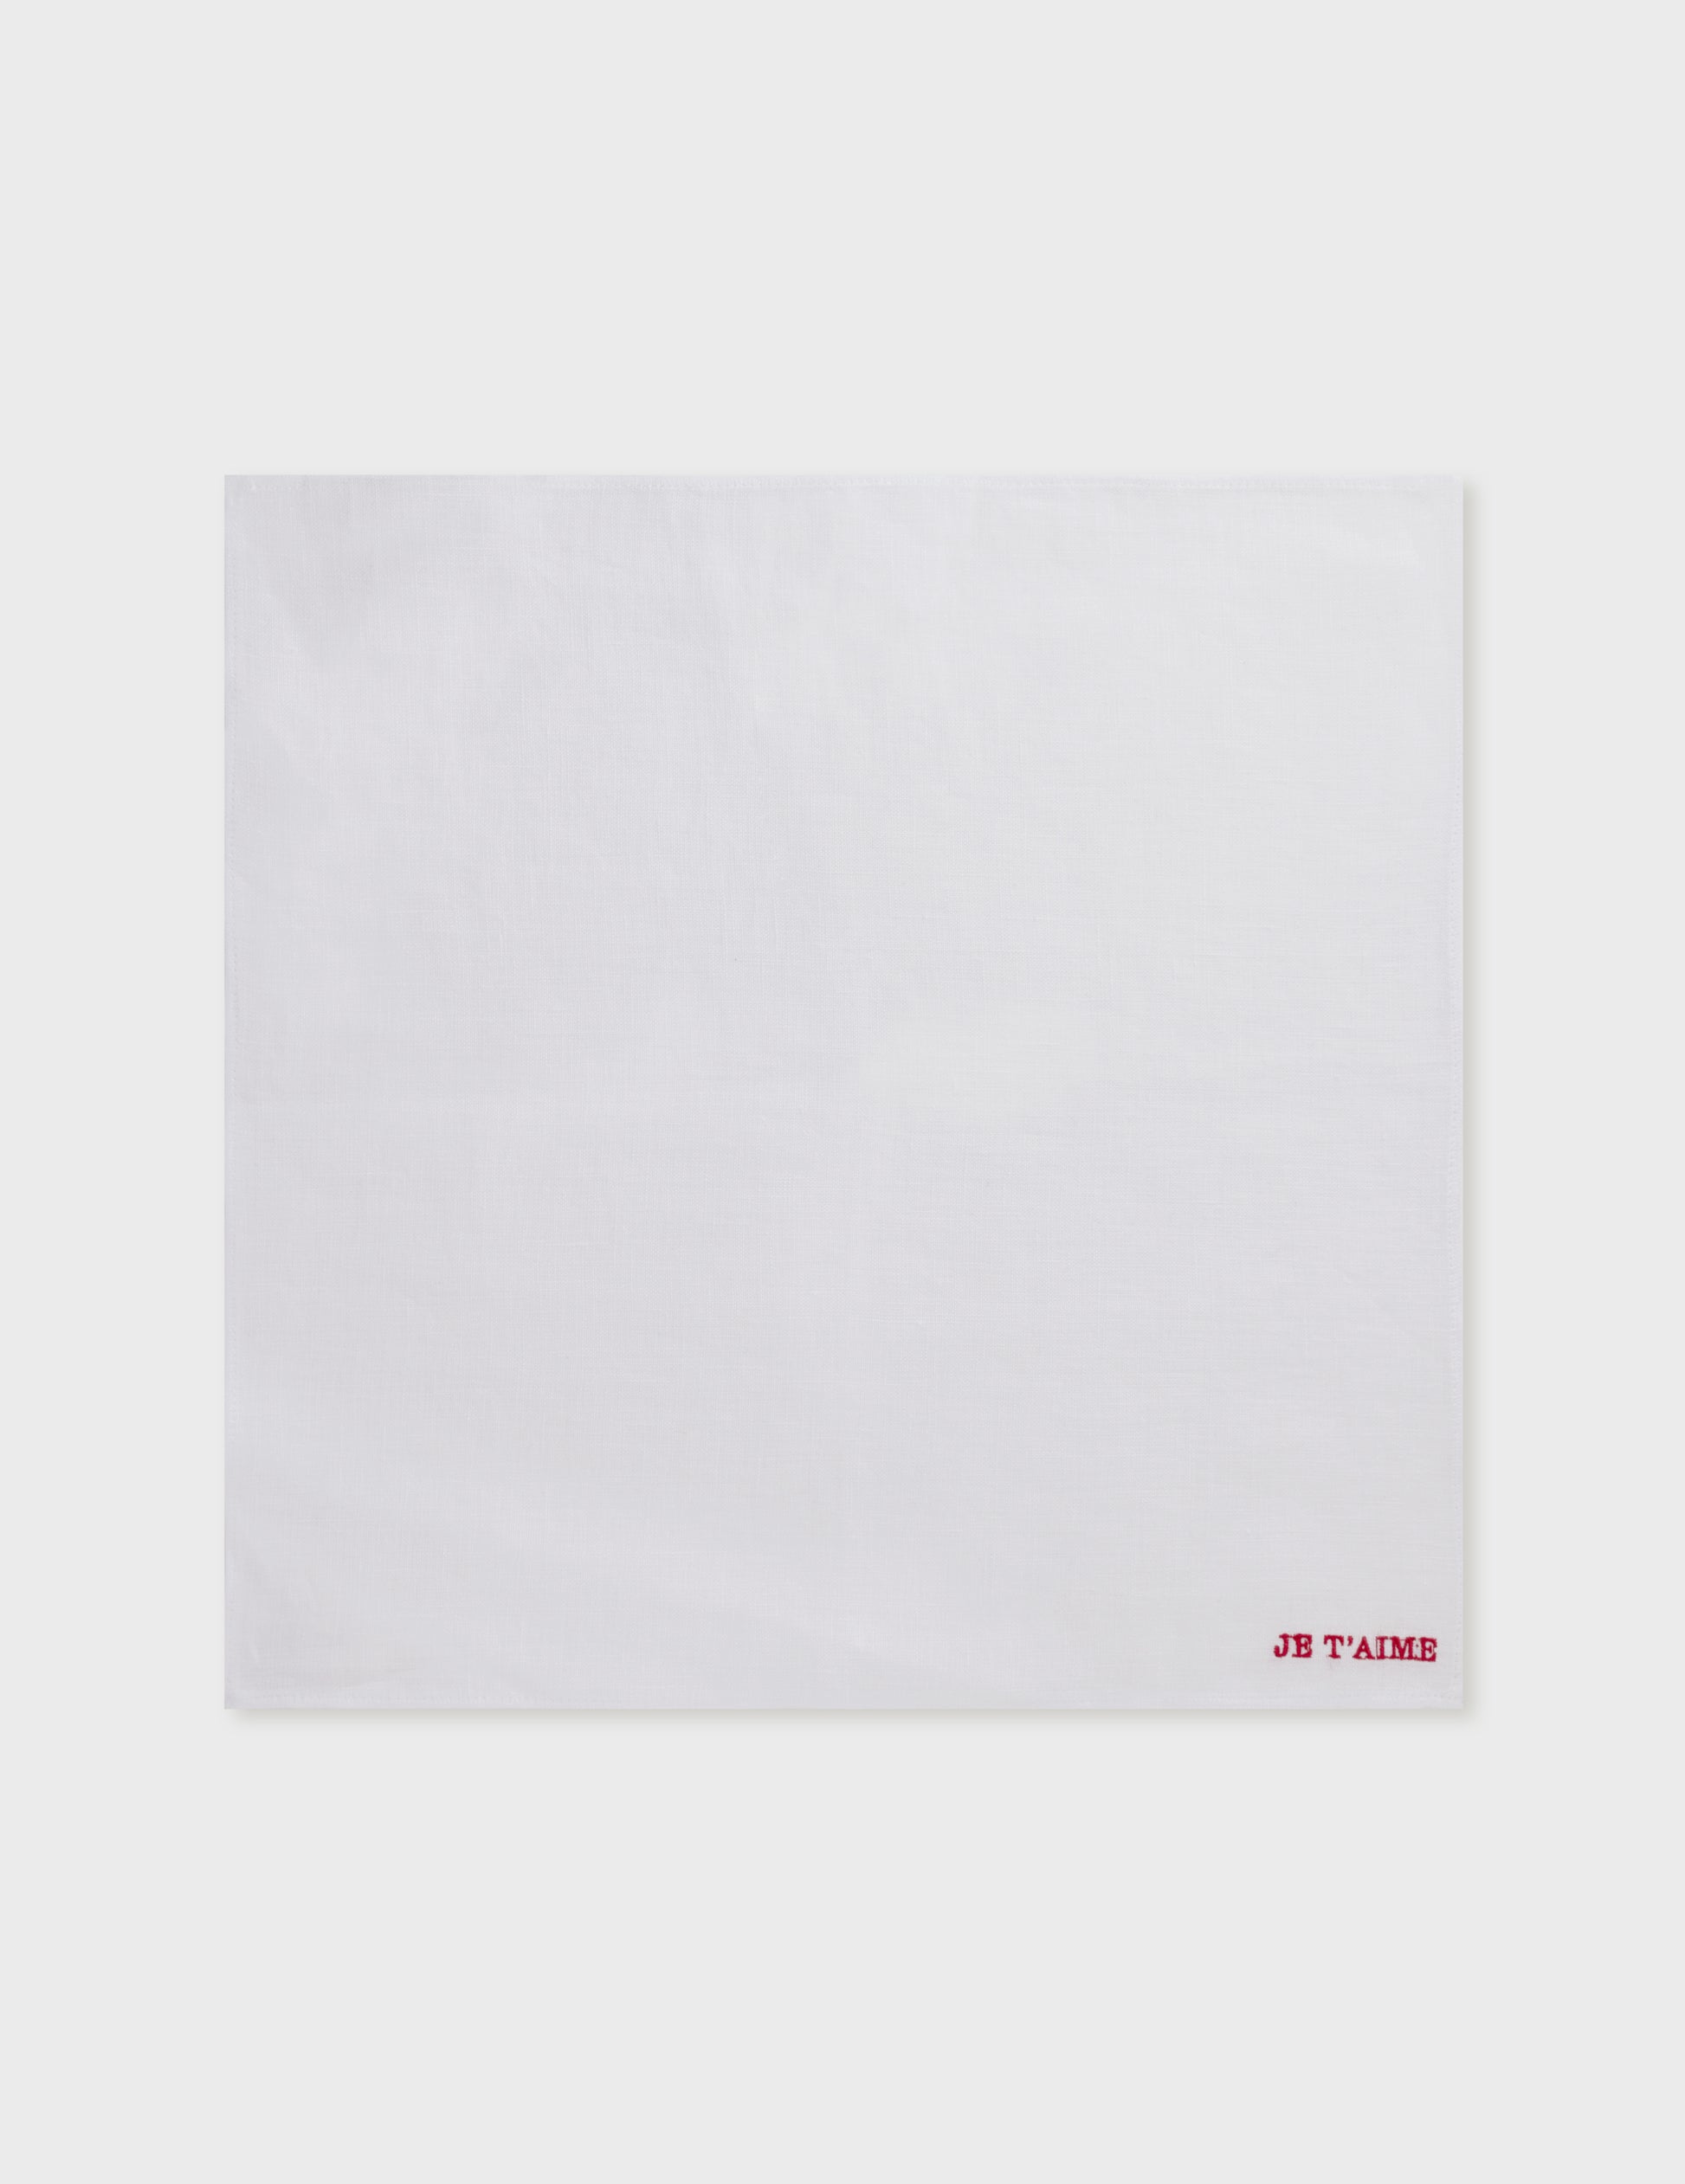 White "Je t'aime" pocket square with red embroidery